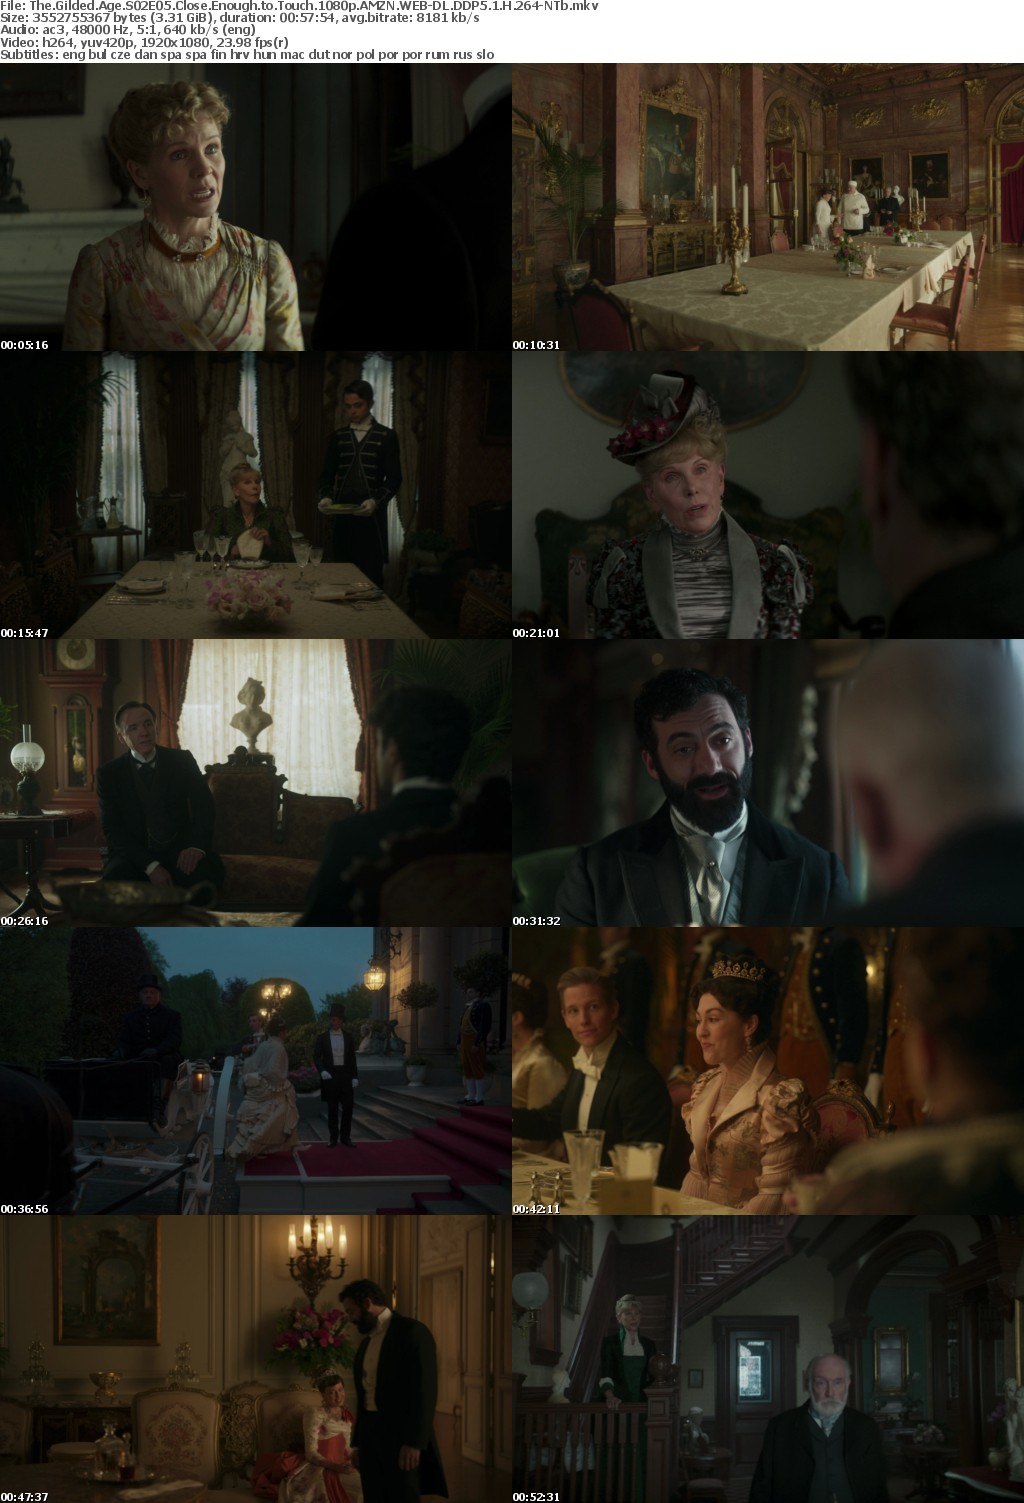 The Gilded Age S02E05 Close Enough to Touch 1080p AMZN WEB-DL DDP5 1 H 264-NTb